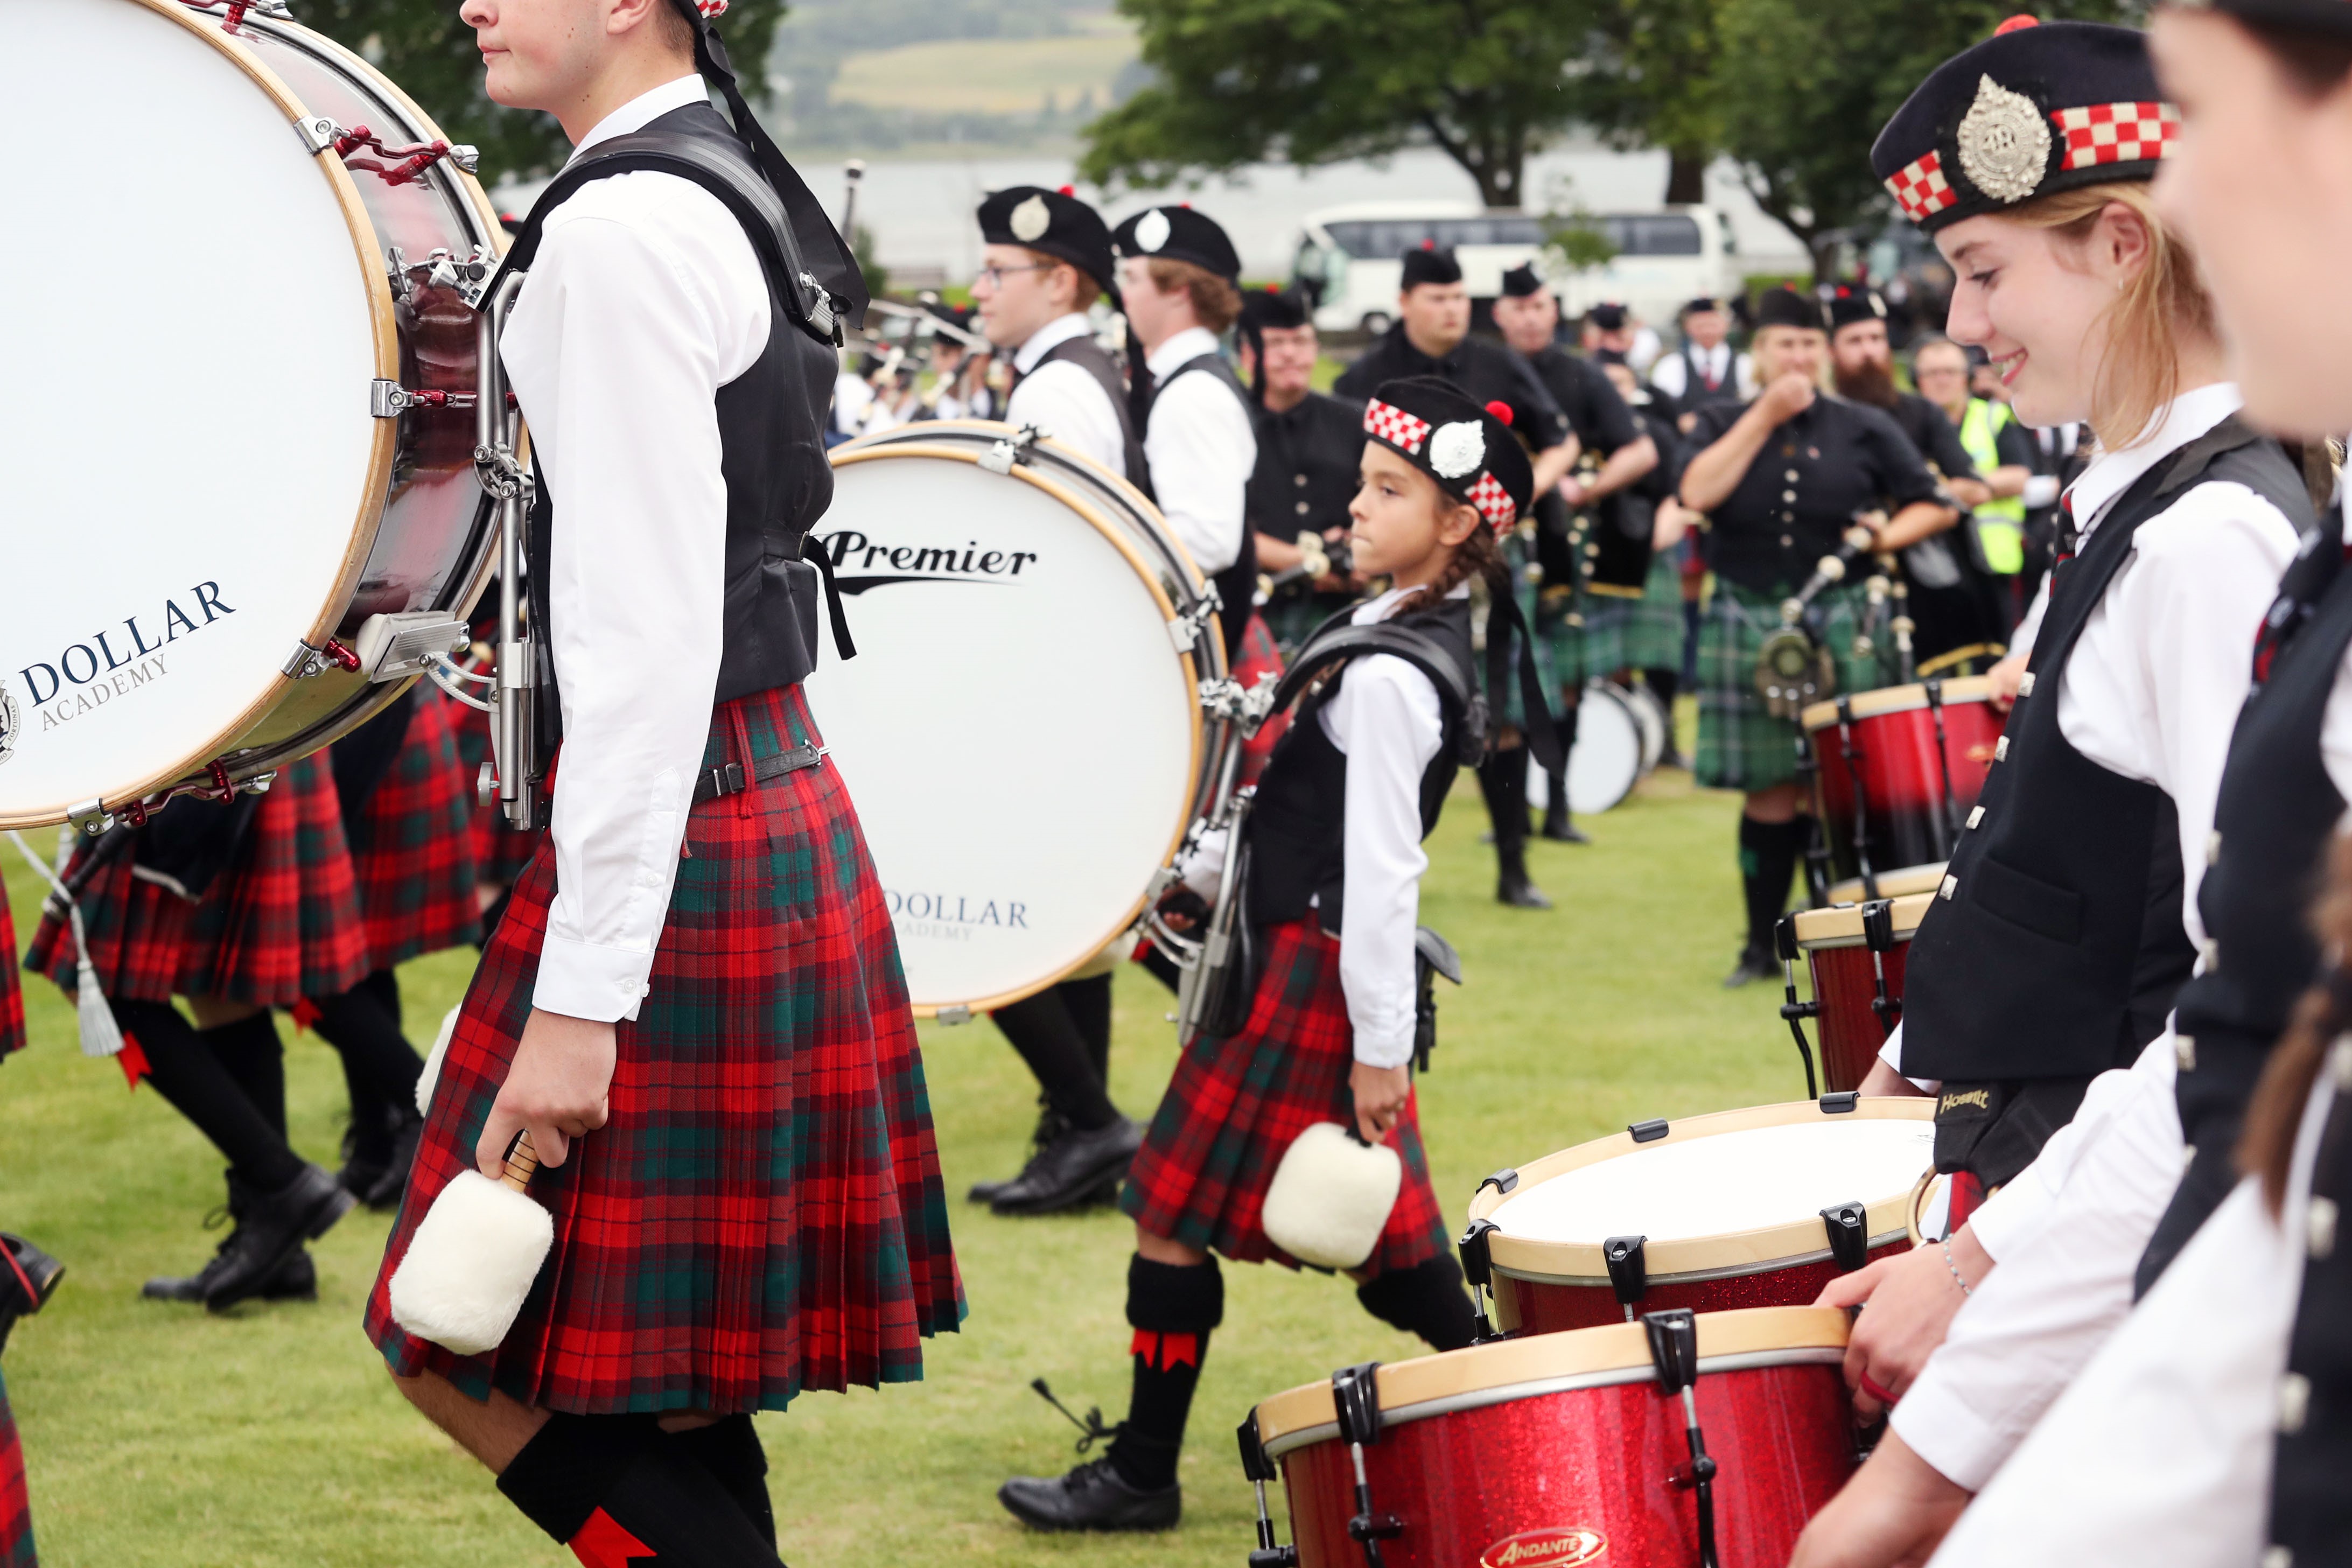 Band marching at the Scottish Pipe Band Championships